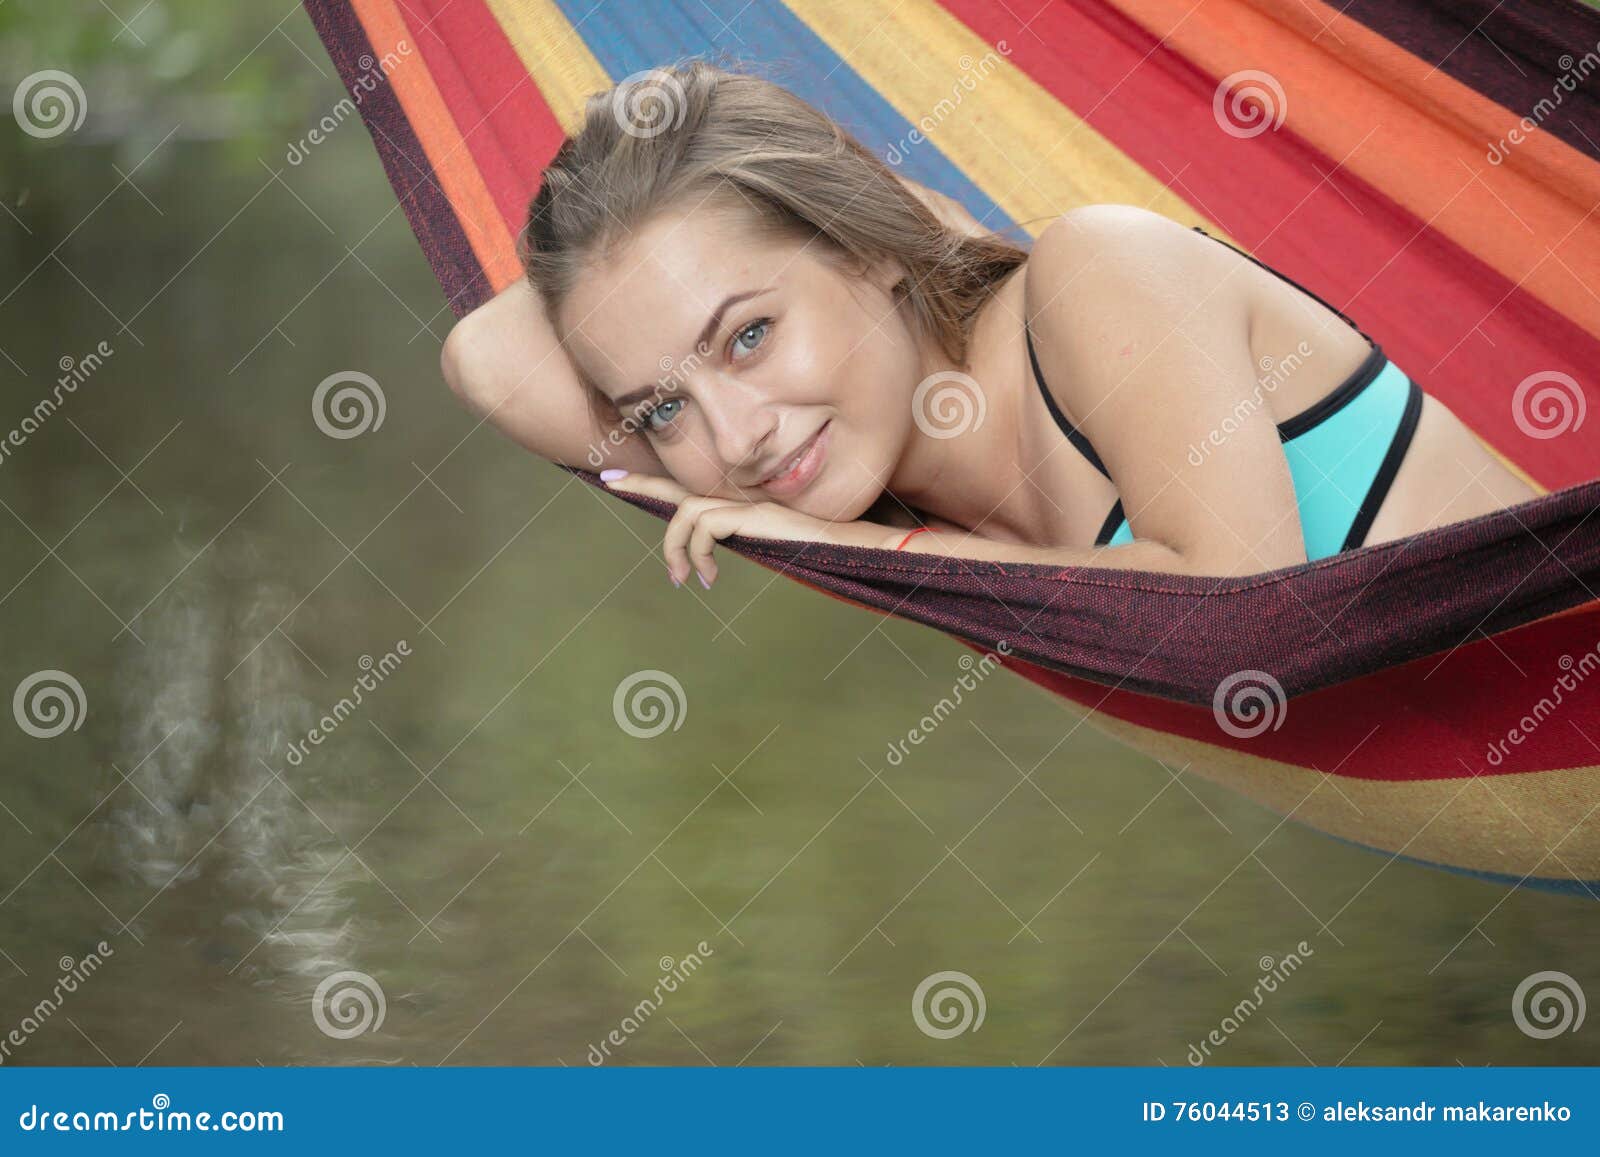 Girl In A Bathing Suit Lying In A Hammock Over The Water Stock Image Image Of White Resort 